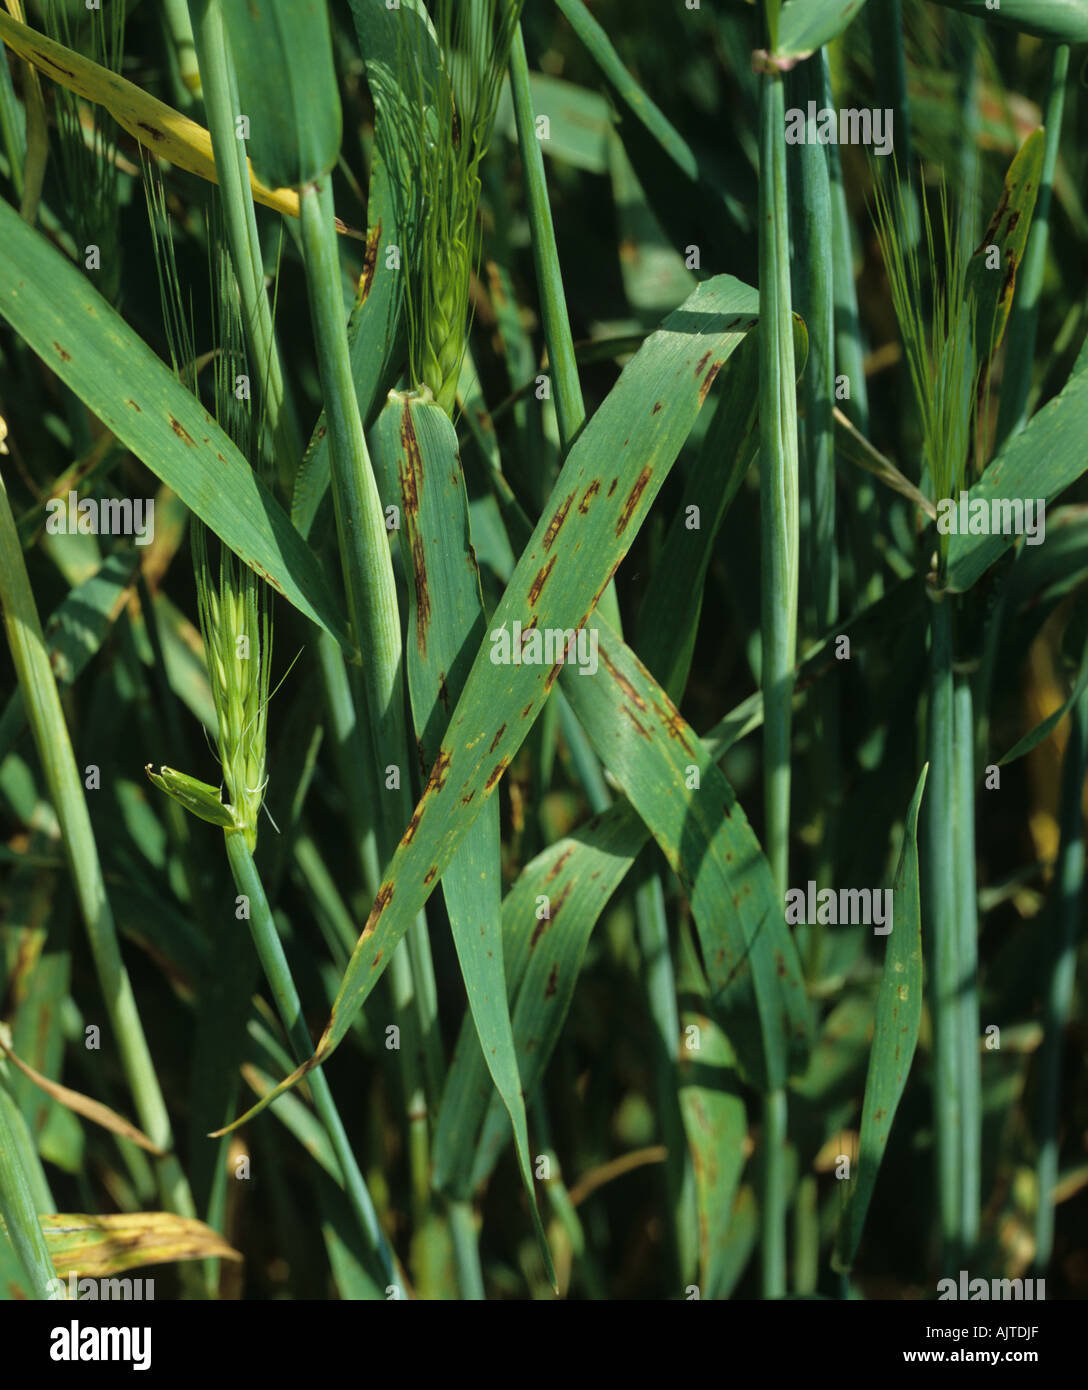 Net blotch Pyrenophora teres f sp teres lesions on barley flagleaves Stock Photo